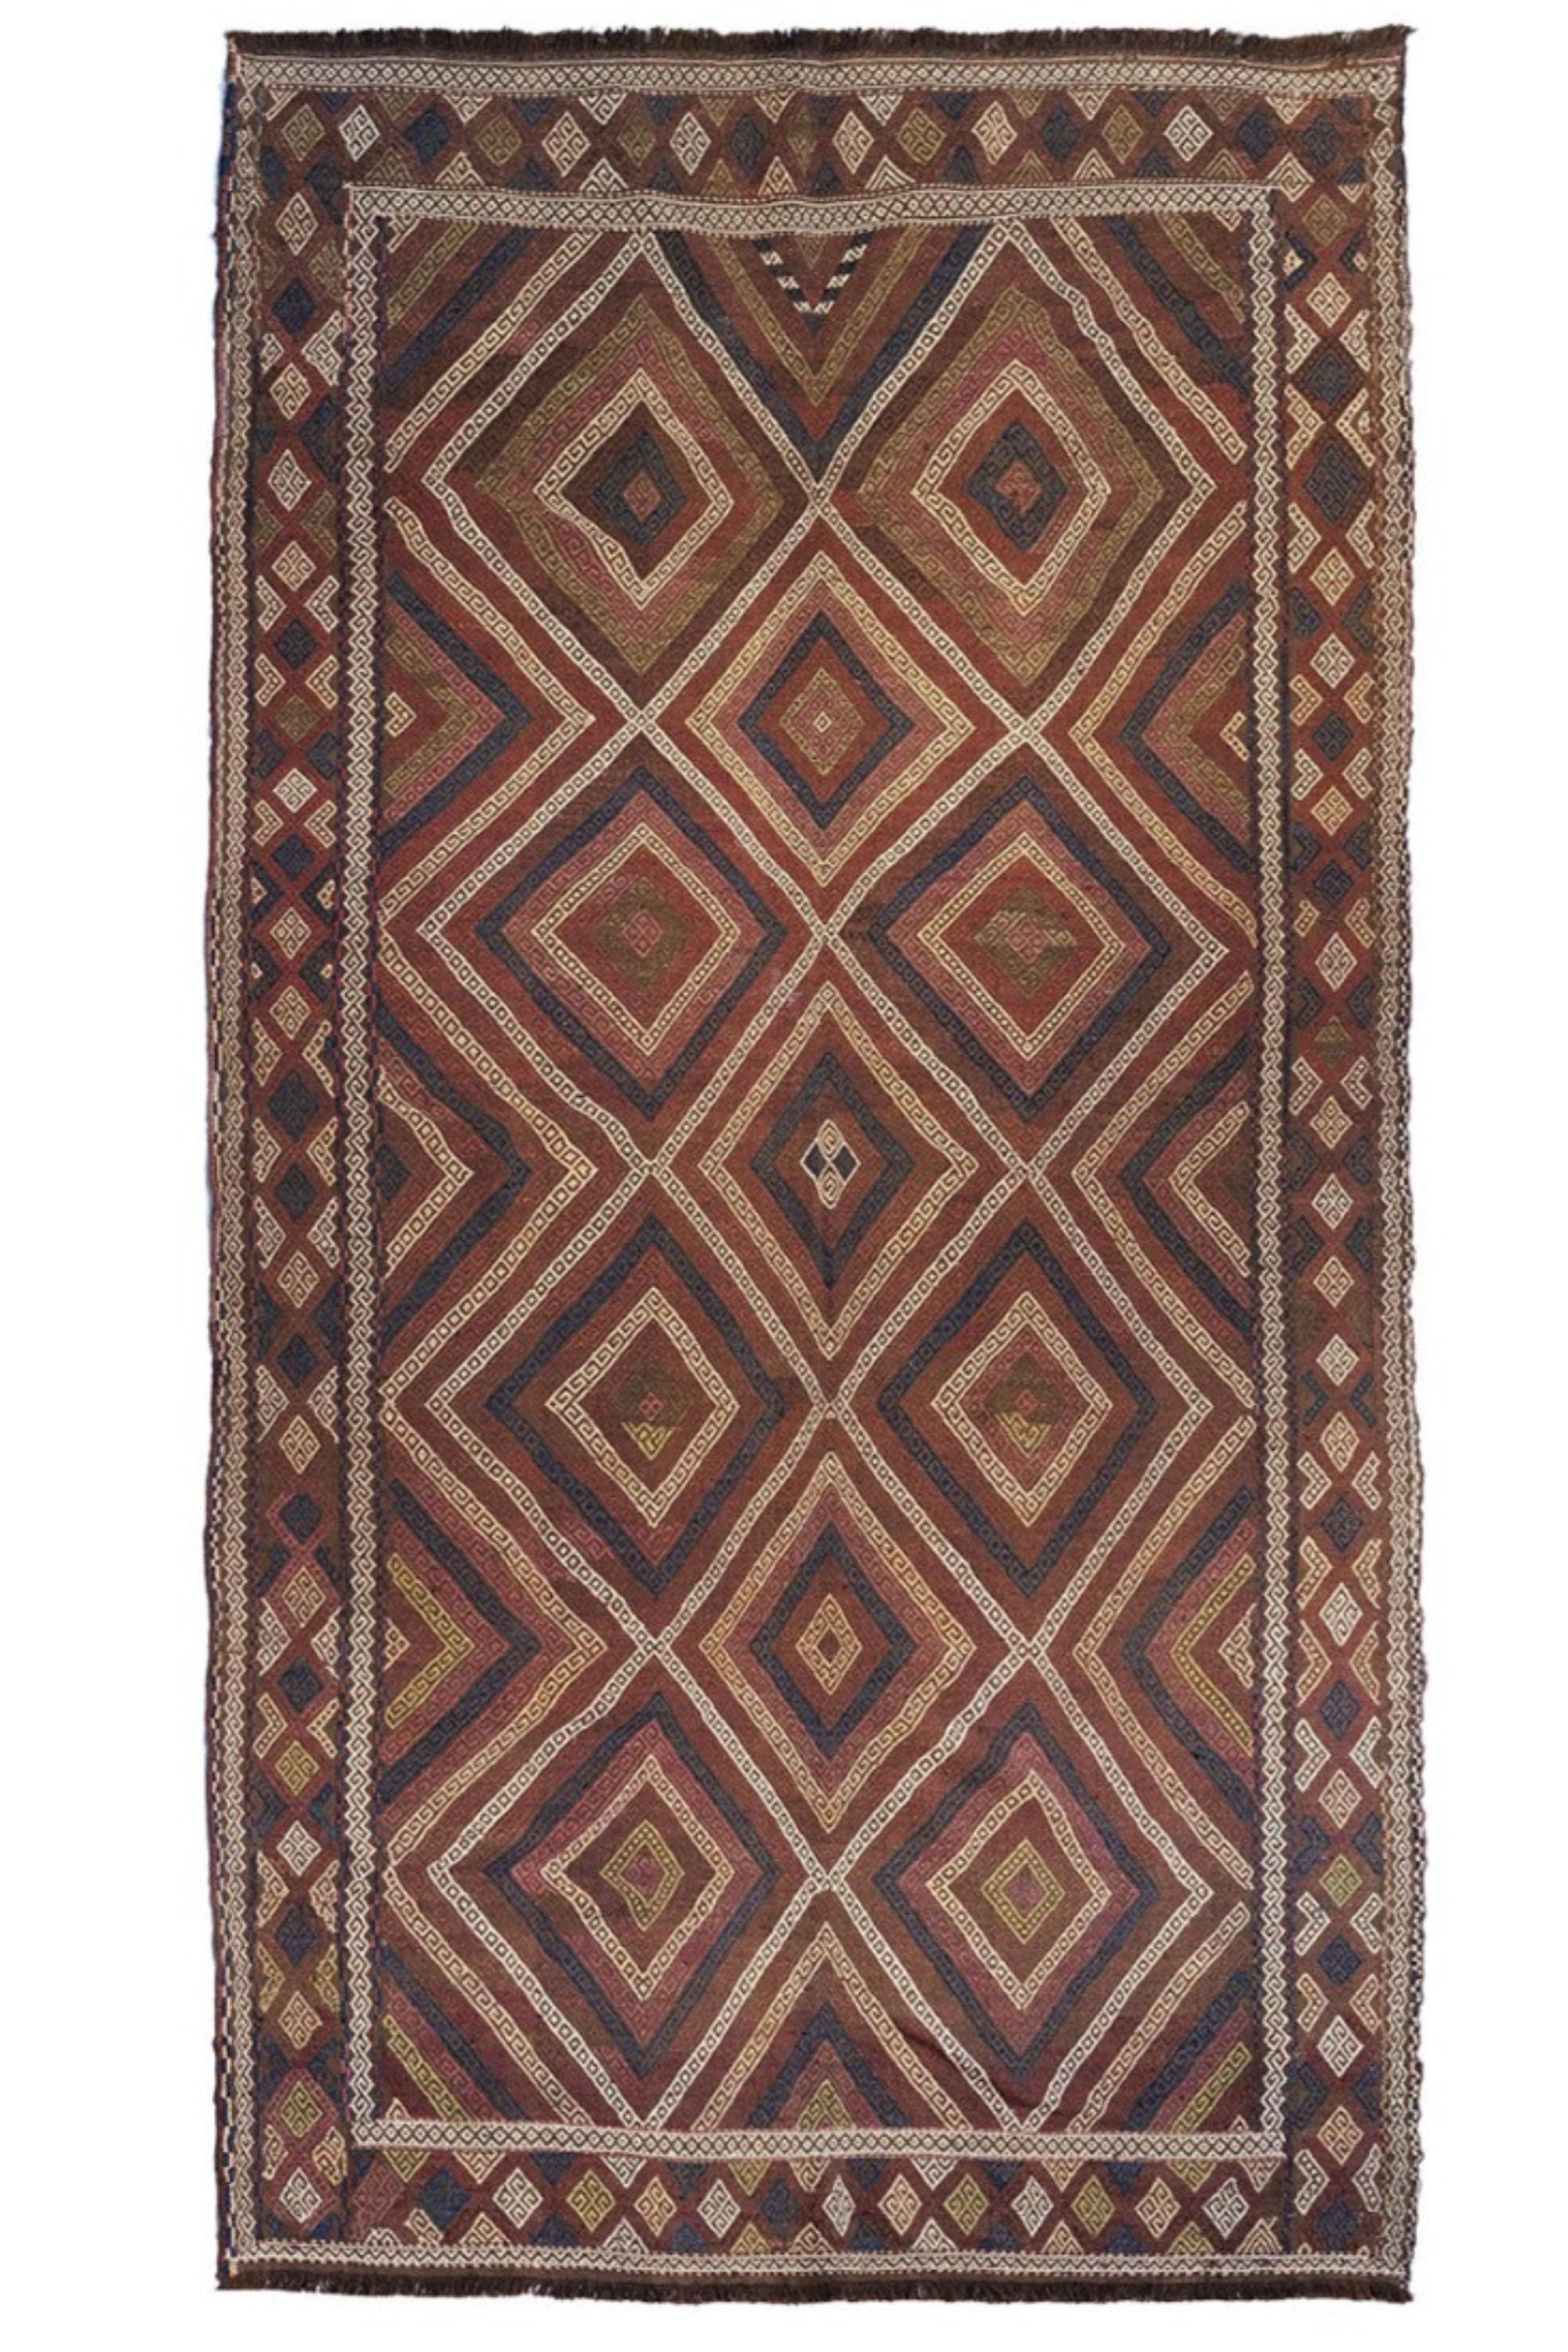 Brown, black, and red traditional Afghan rug